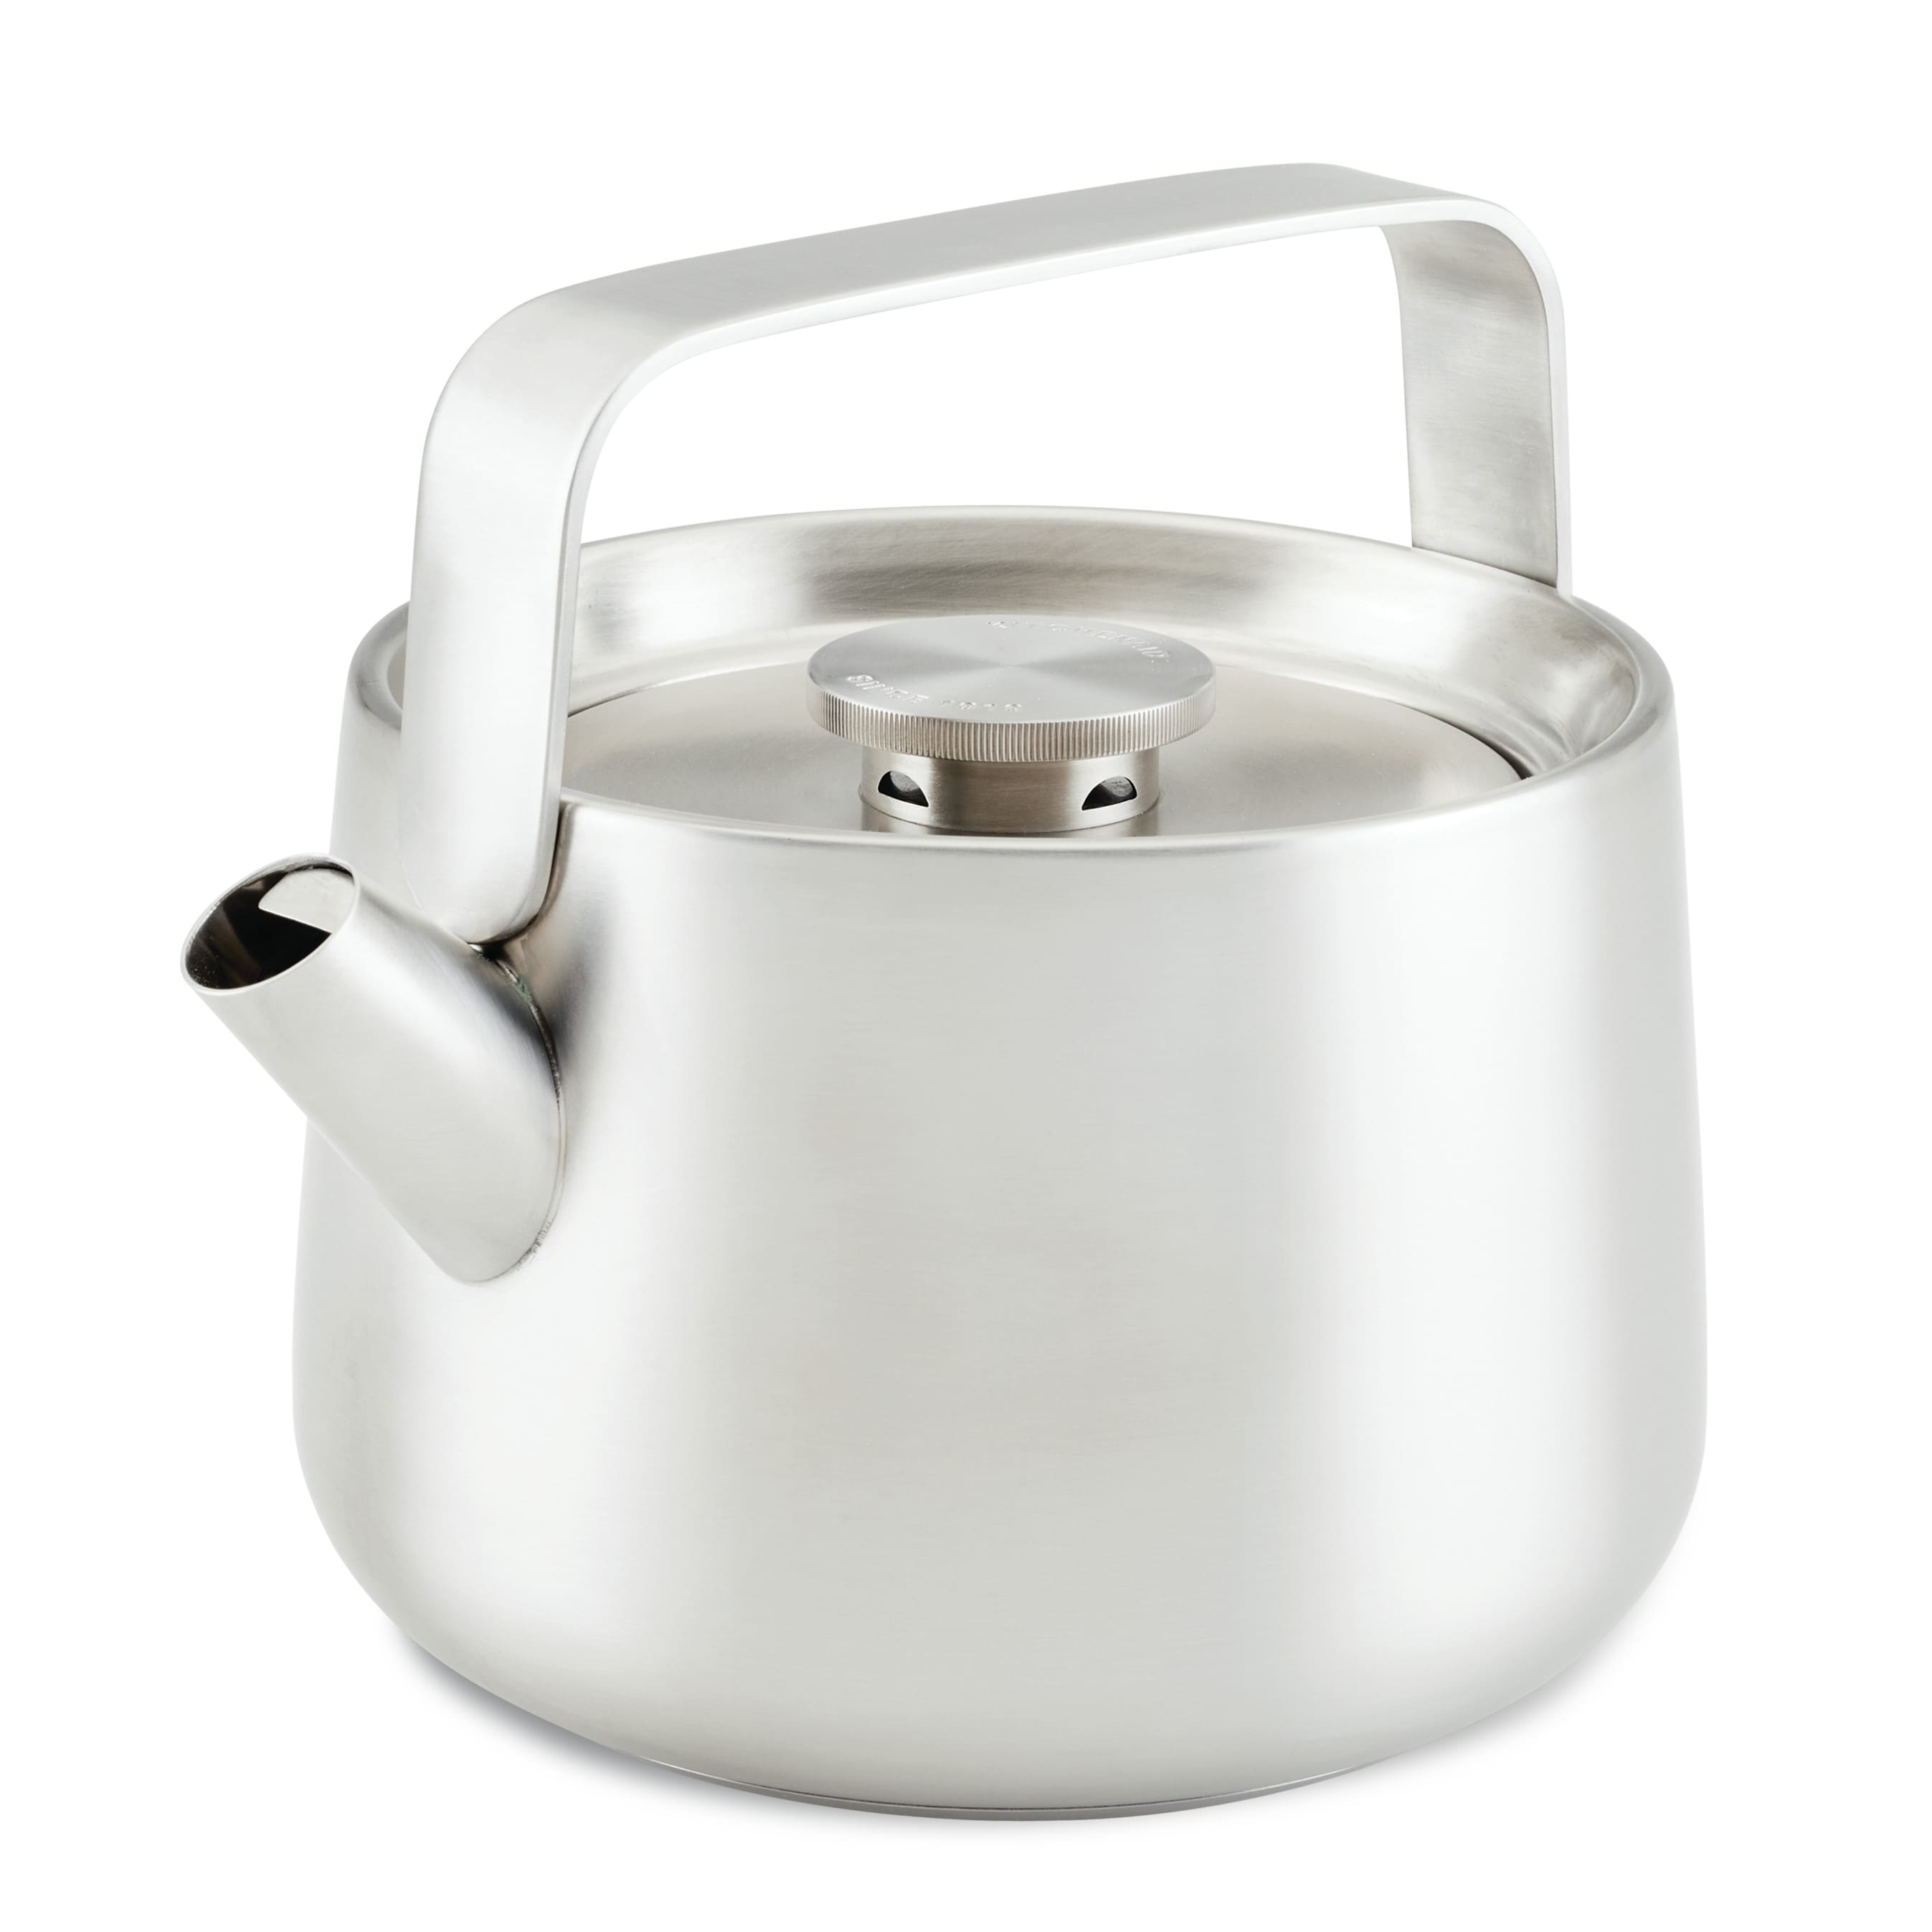  Copco Stainless Steel 2.1 Quart Whistling Tea Kettle, Glossy  Copper Finish: Home & Kitchen